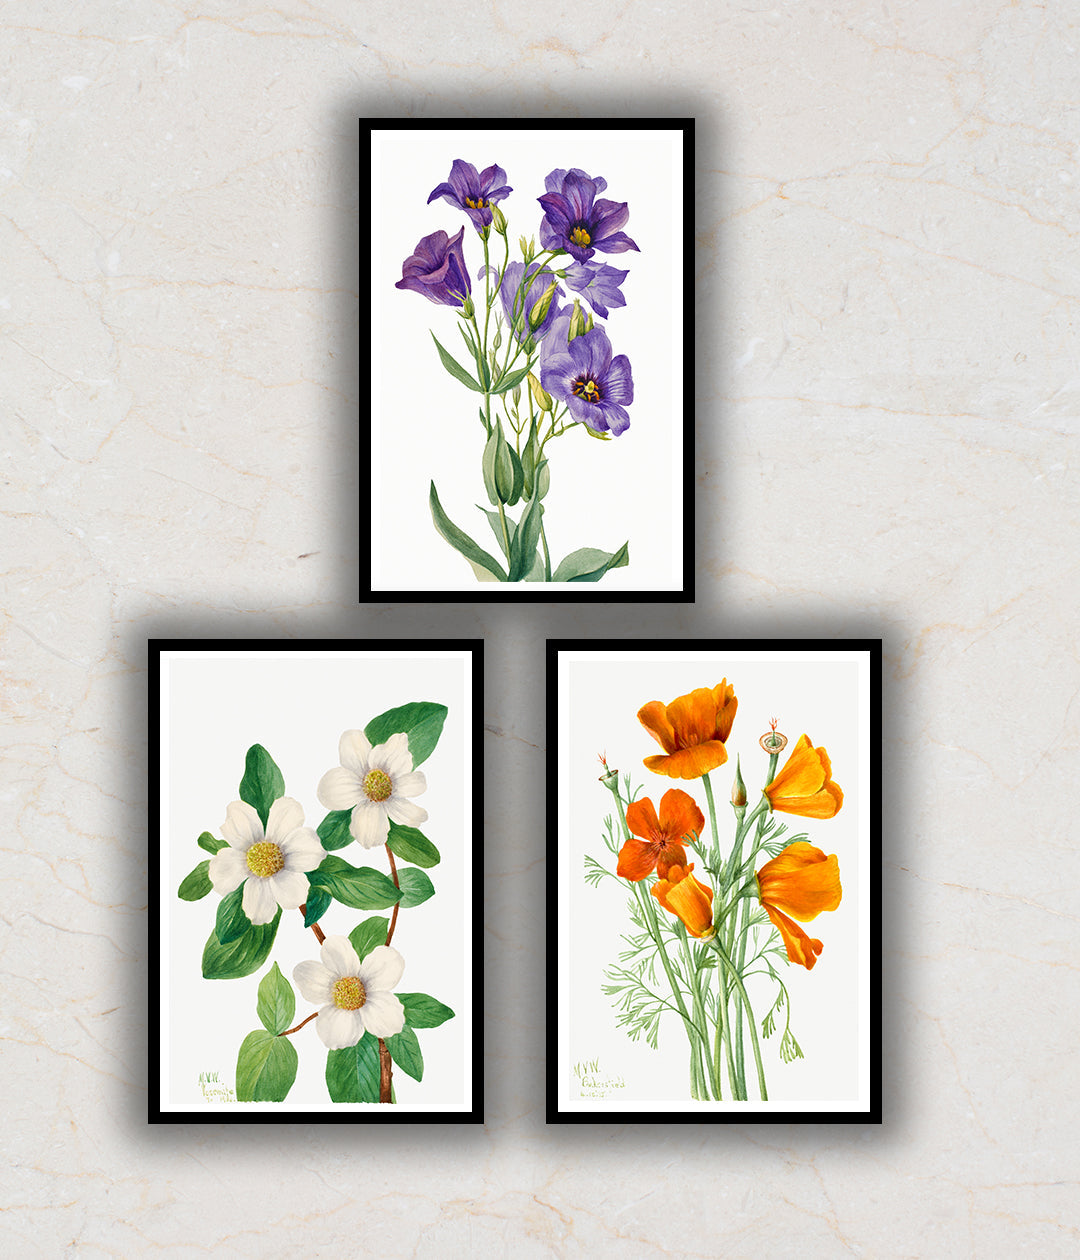 Wild Flowers Set of 3 Floral Paintings by Mary Vaux Walcott